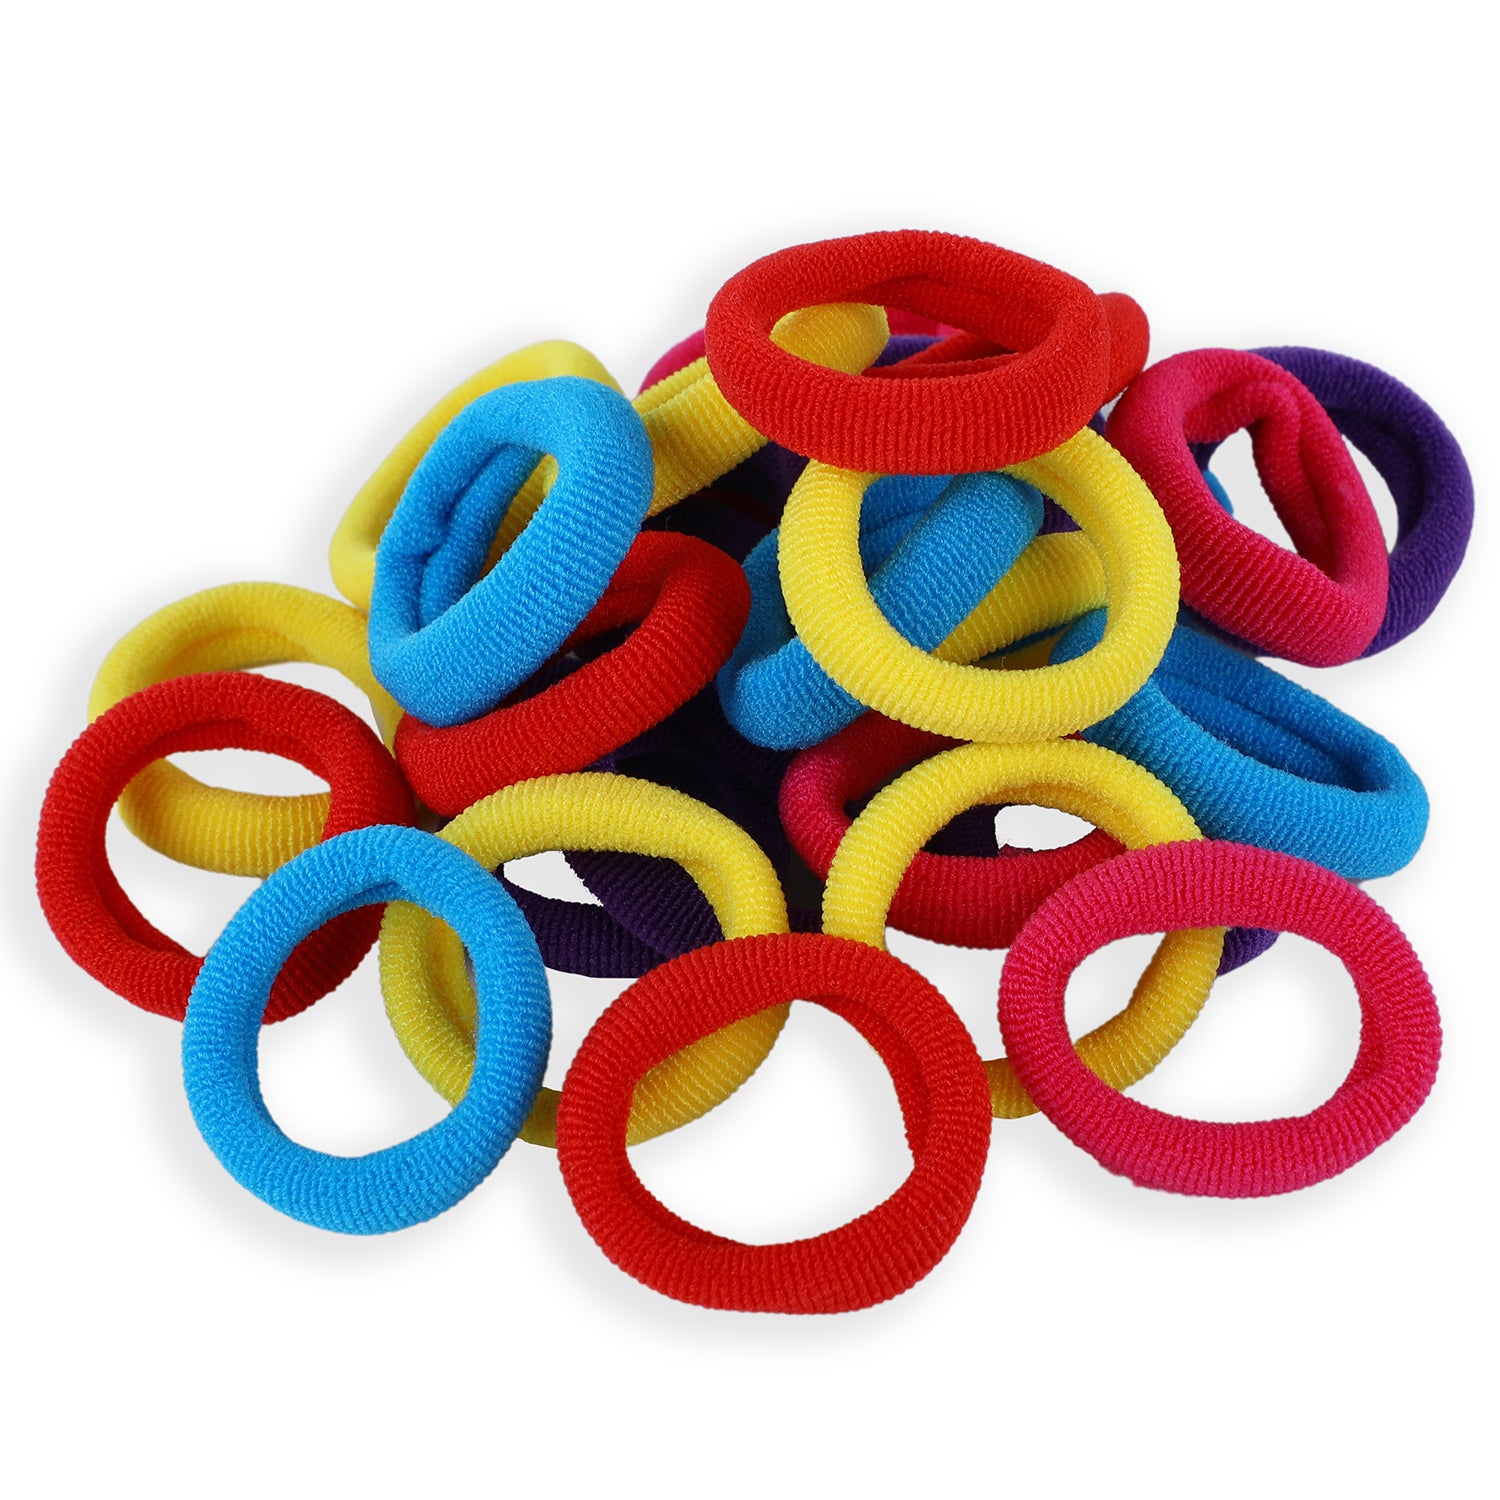 Shivoria 100 pcs Multi Color Hair Holder Tie Soft Tiny Small Elastic Rubber  Bands Braiding for